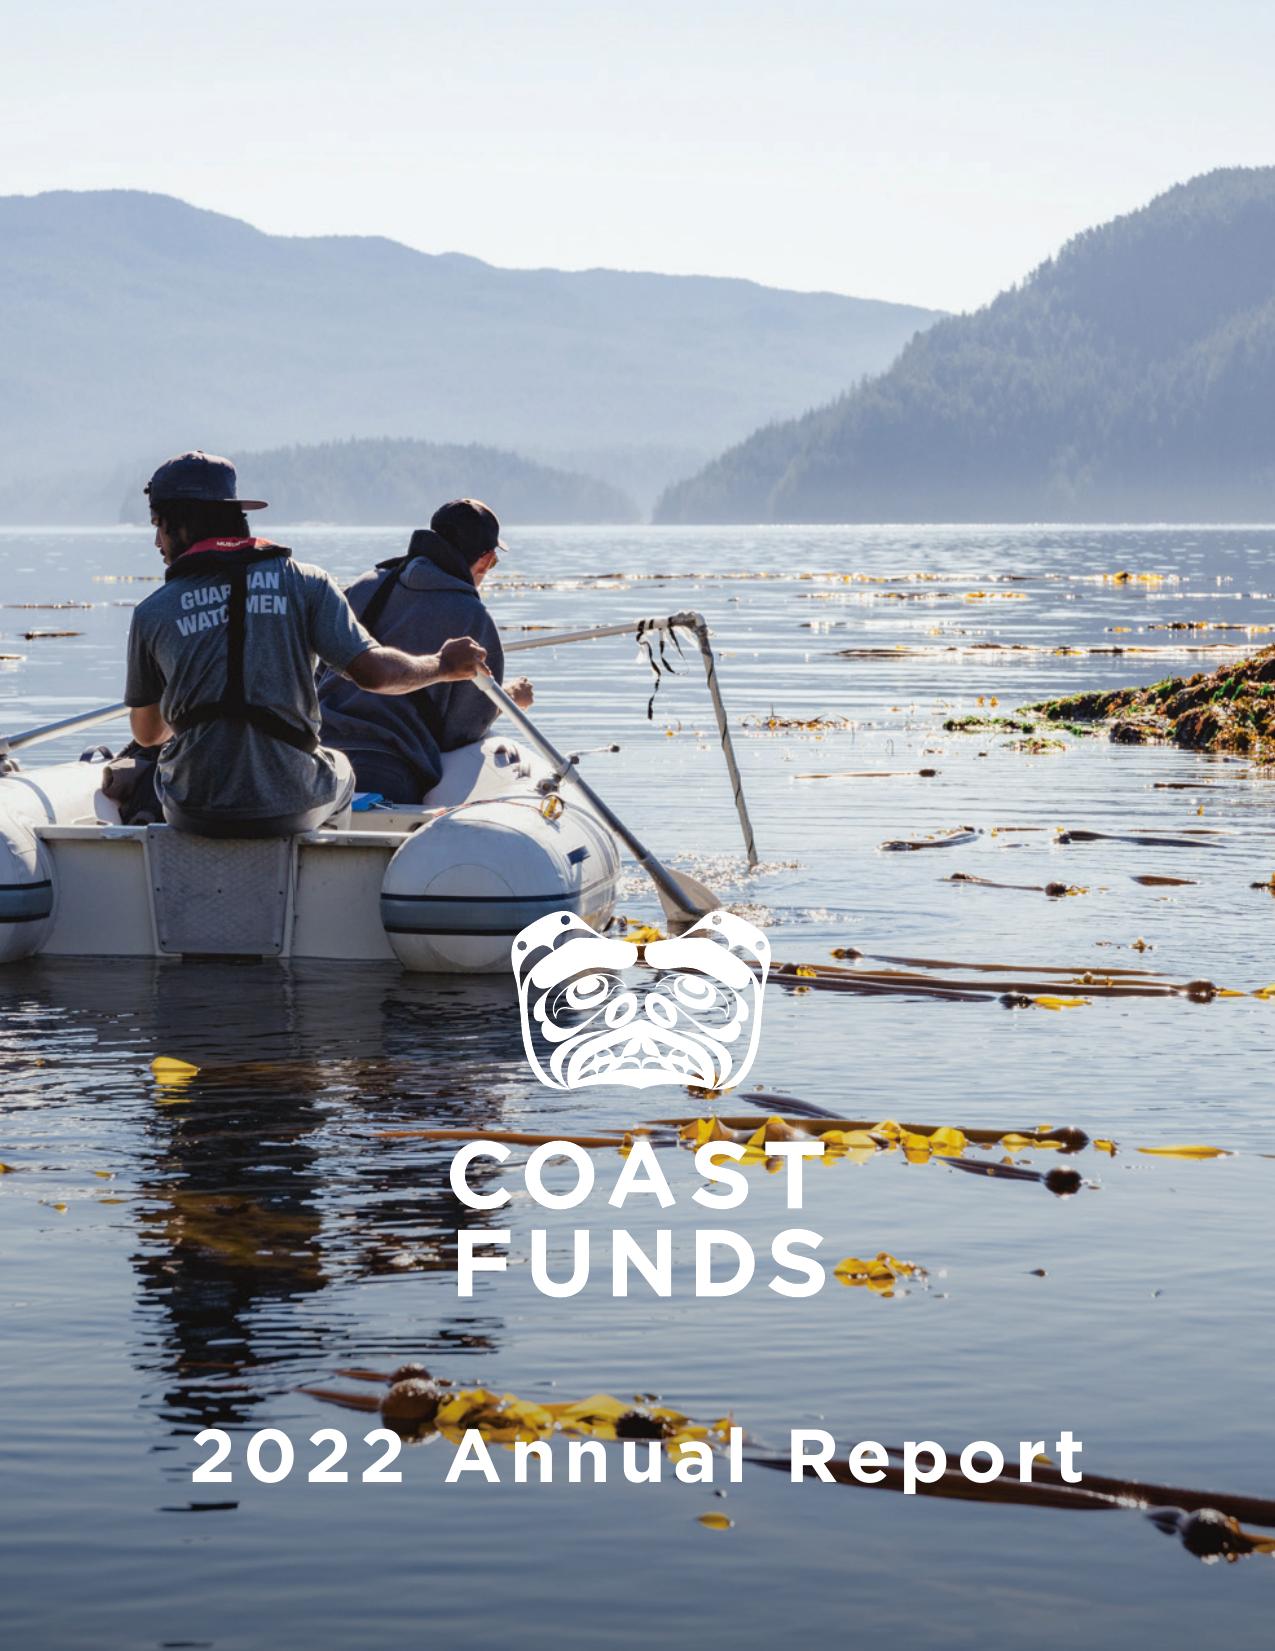 COASTFUNDS 2023 Annual Report